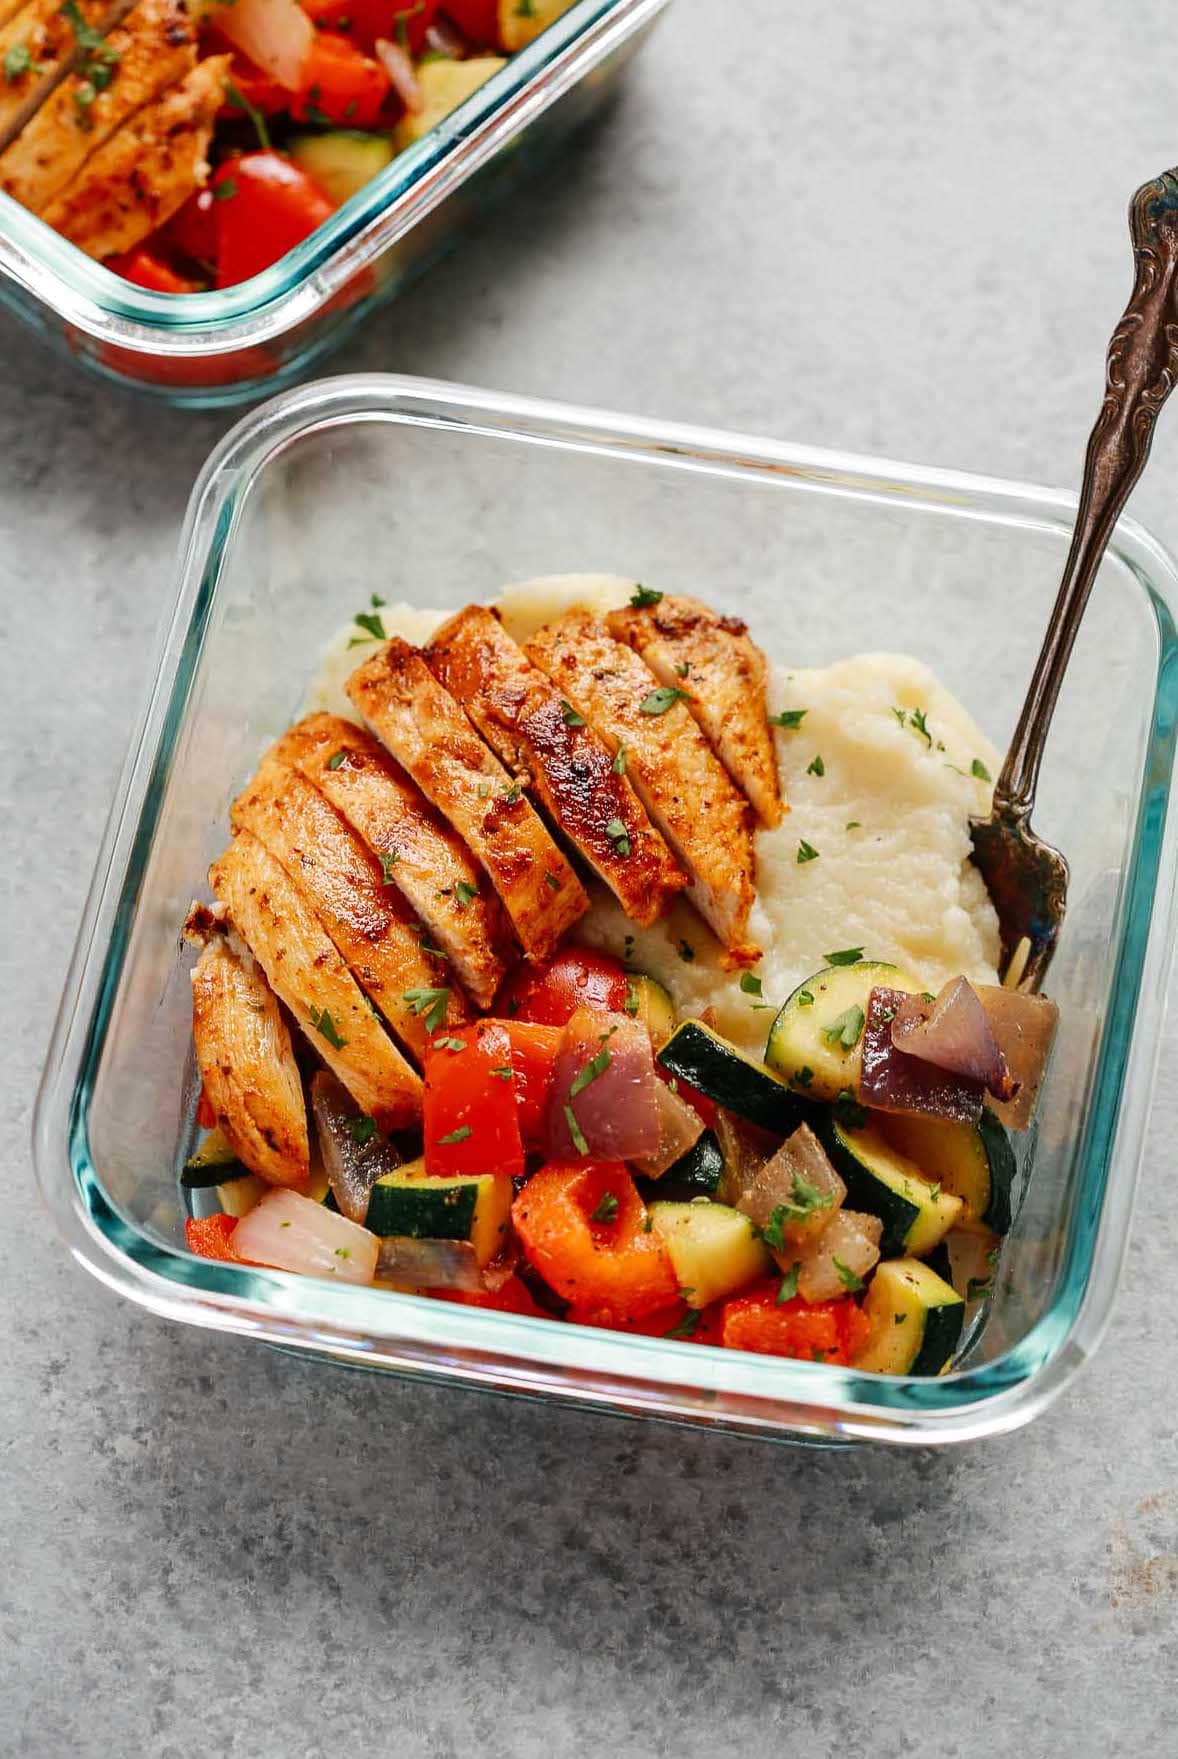 sliced baked chicken breast, cooked mixed vegetables and cauliflower mashed potatoes in square glass meal prep container